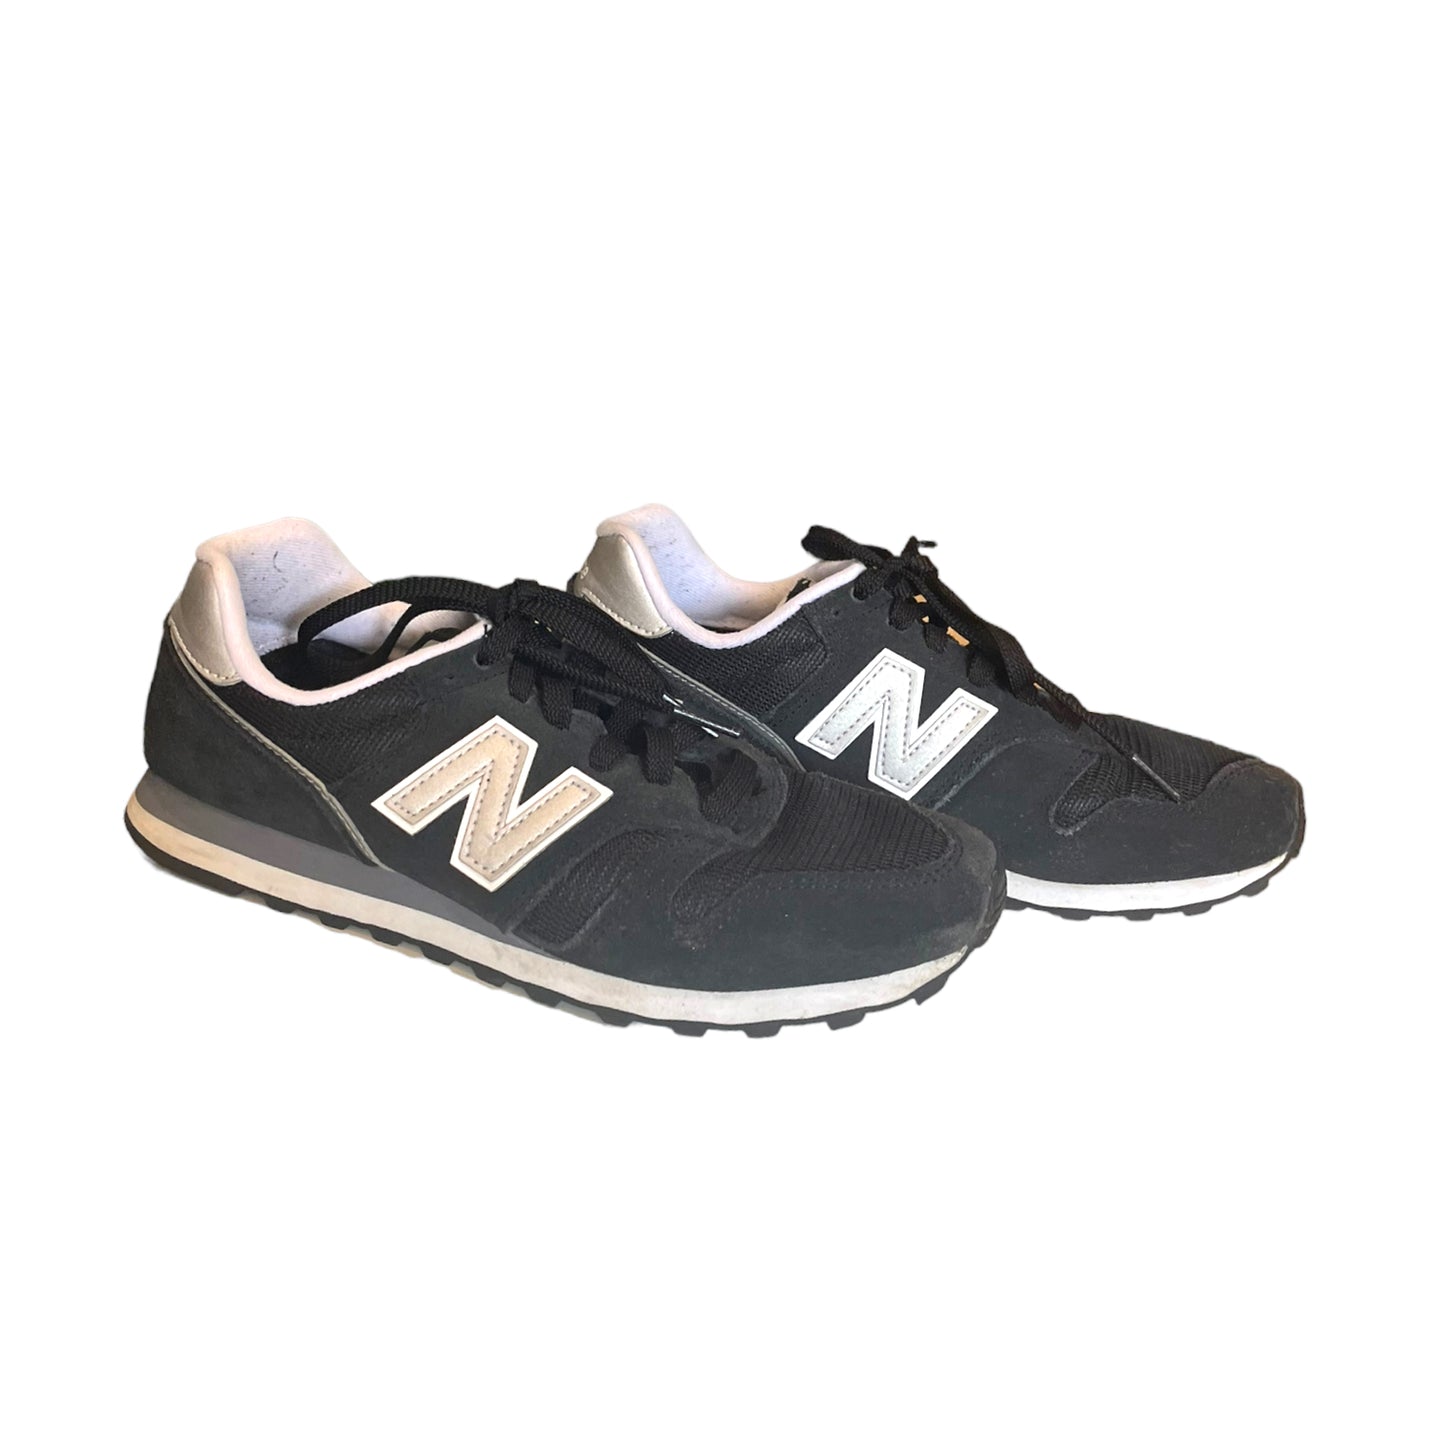 New Balance Black Suede Trainers